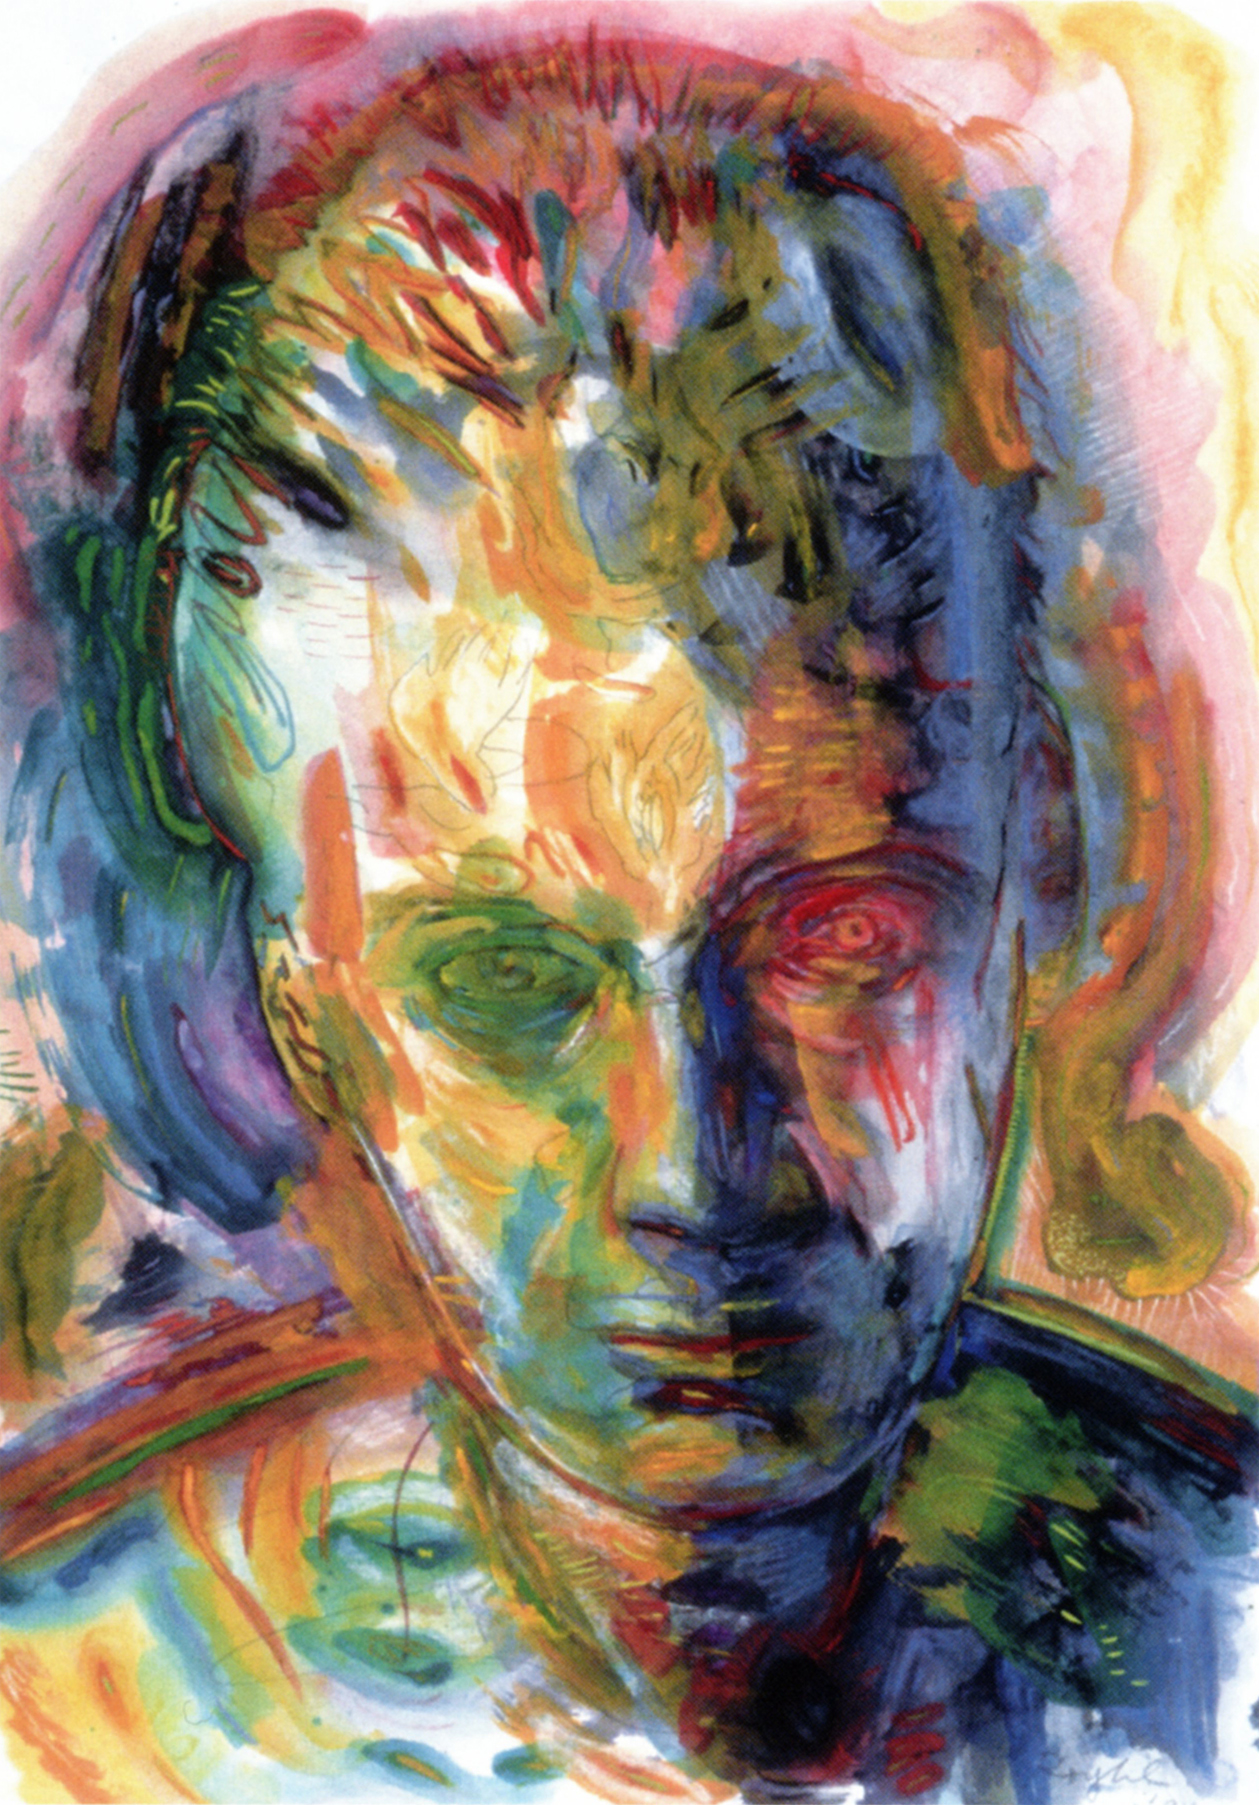 Robert Royhl, Self-Portrait, 1994, mineral pigments on paper, 22.5 x 15 inches, Collection of Yellowstone Art Museum.